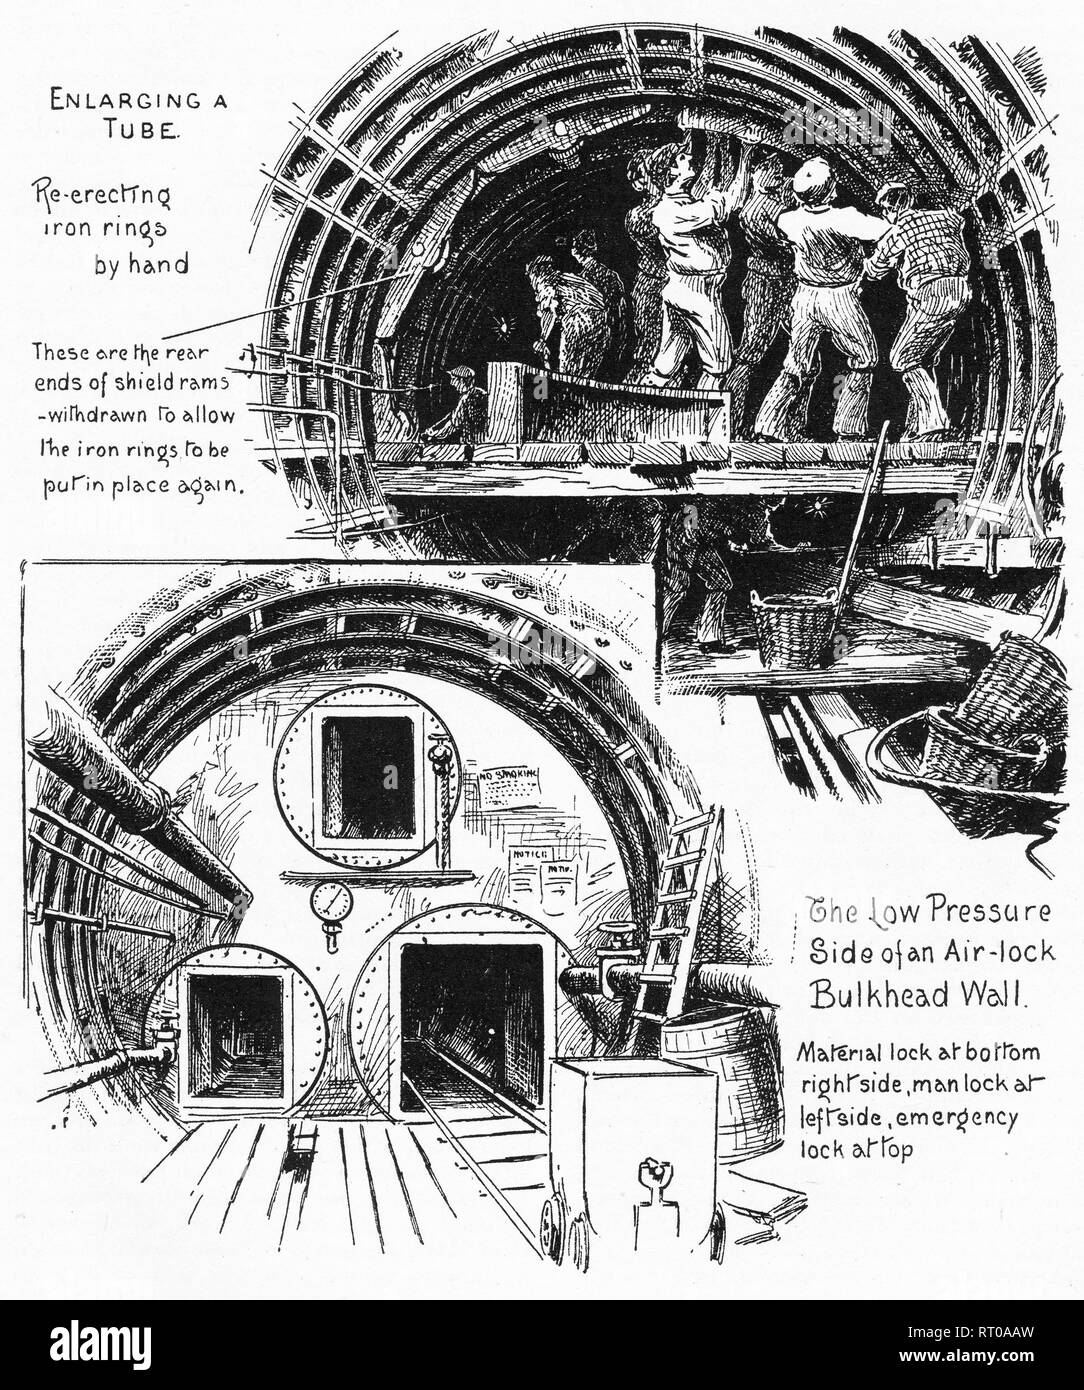 Engraving of men working on the London Tube railway system, building tunnels under the city. From Chatterbox magazine, 1925 Stock Photo